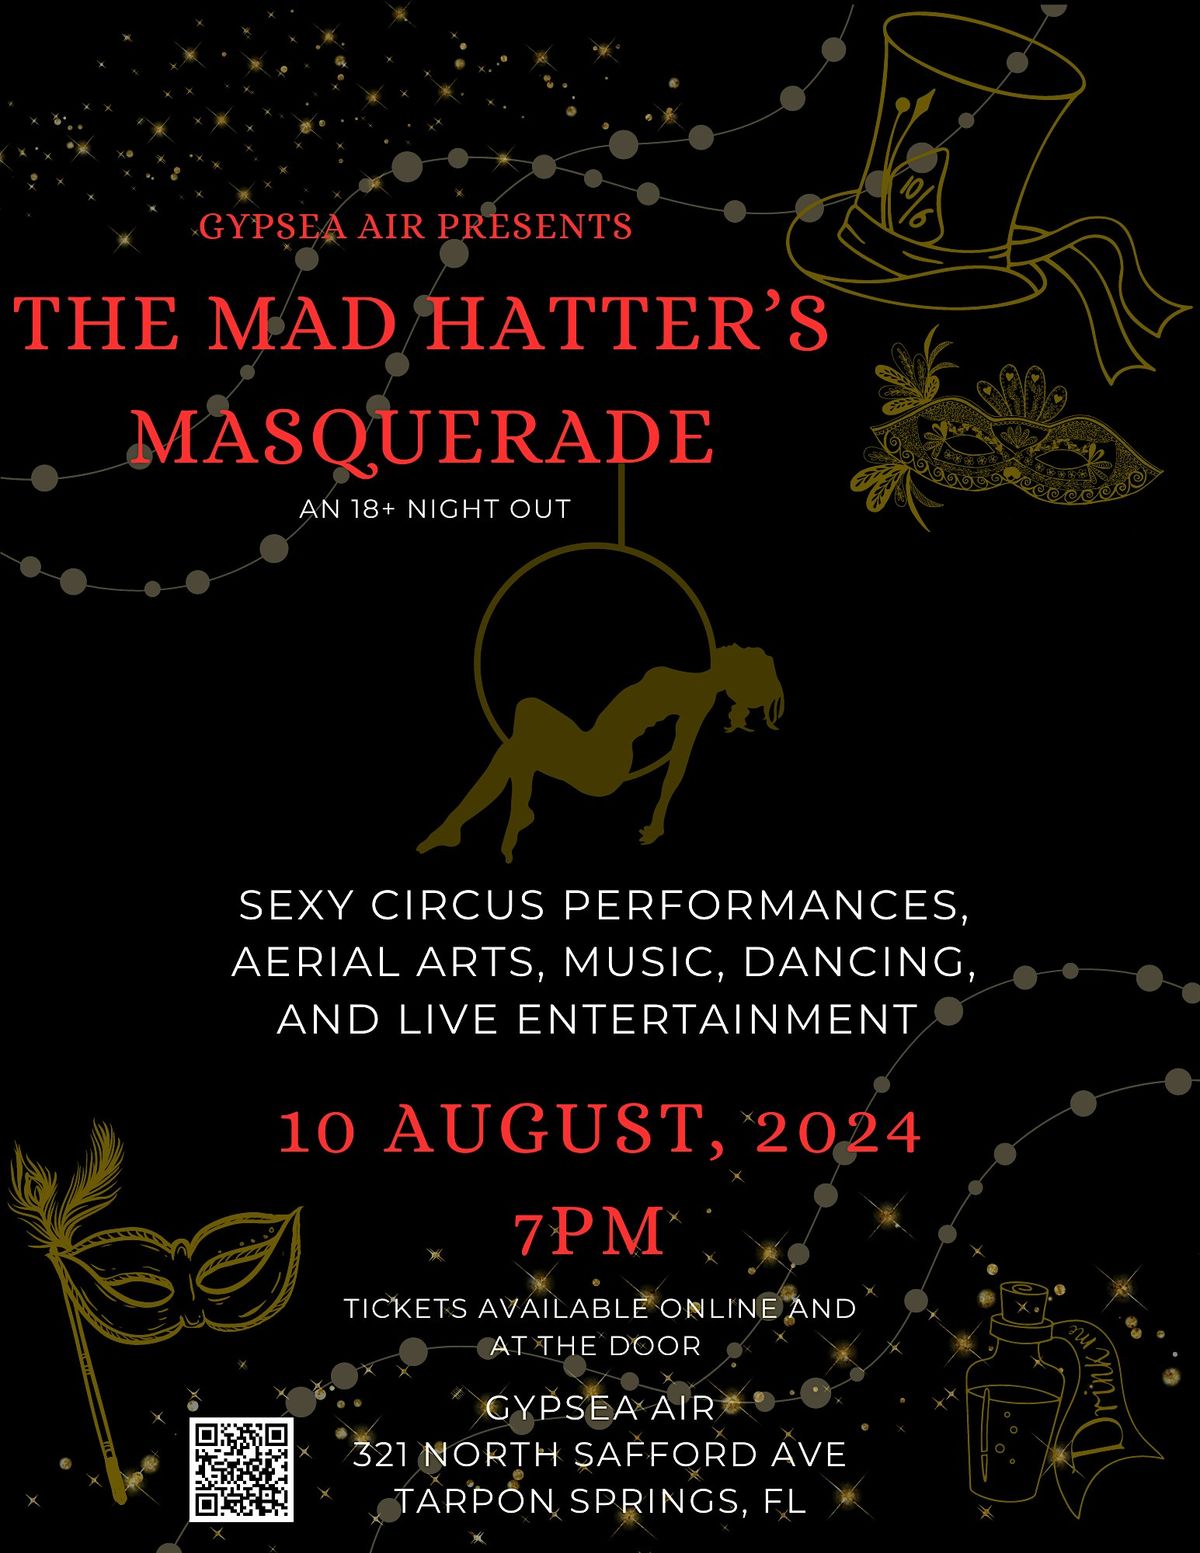 The Mad Hatter's Masquerade - A Sexy Circus Show